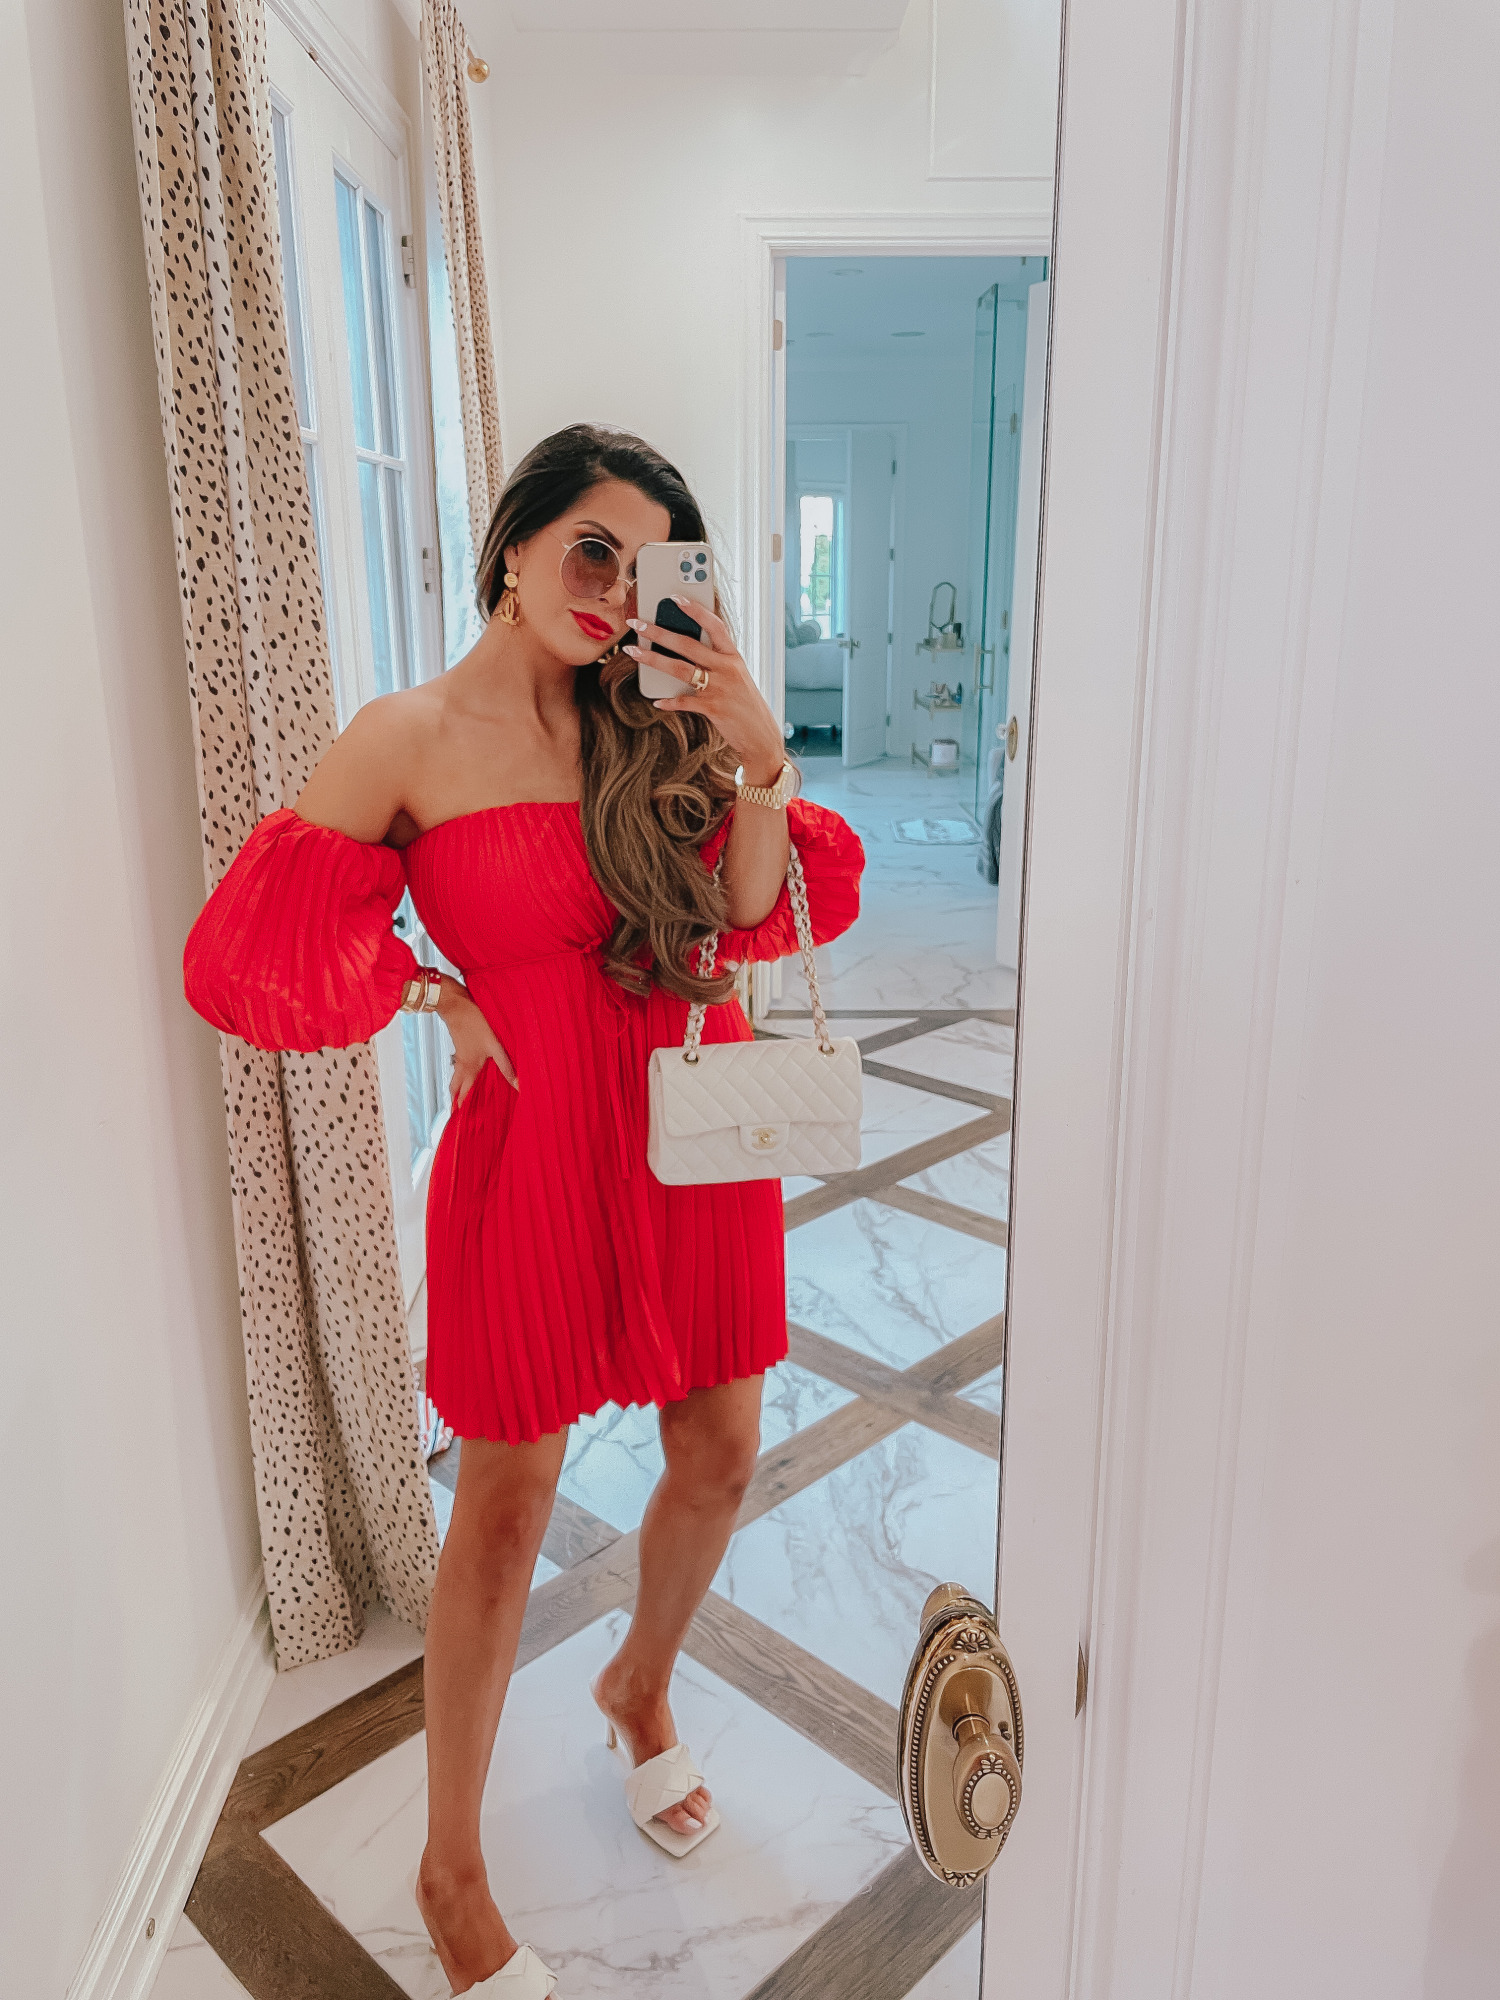 july 4 outfit inspiration 2021, pinterest july 4 outfit, gucci red lipstick, Emily gemma | June Instagram Recap by popular US fashion blog, The Sweetest Thing: image of Emily Gemma wearing. red off the shoulder pleated mini dress and white heel slide sandals. 